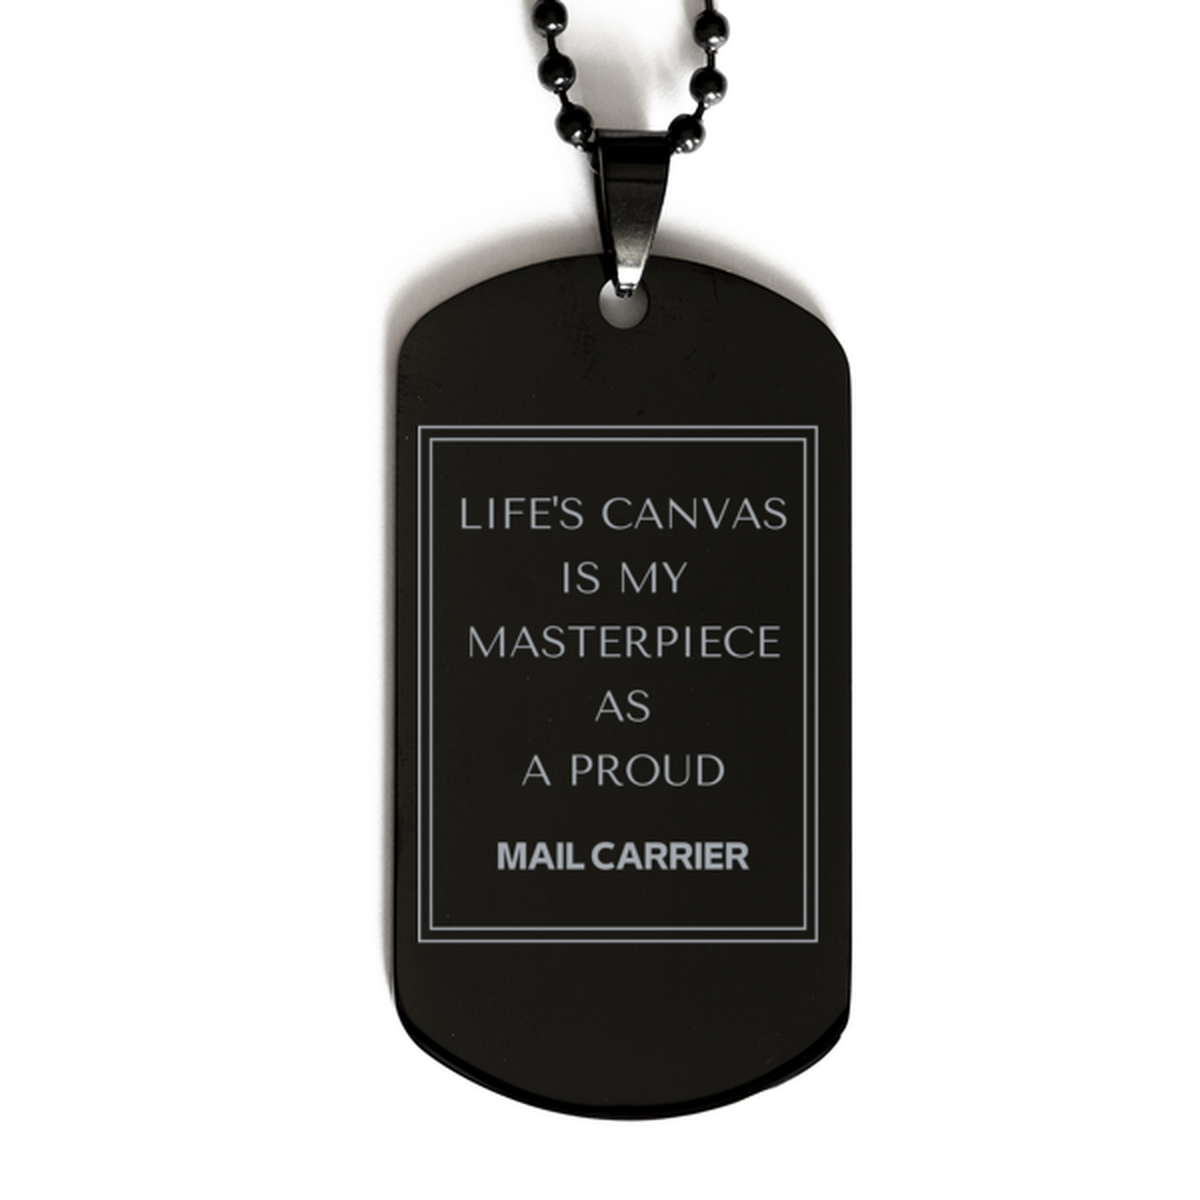 Proud Mail Carrier Gifts, Life's canvas is my masterpiece, Epic Birthday Christmas Unique Black Dog Tag For Mail Carrier, Coworkers, Men, Women, Friends